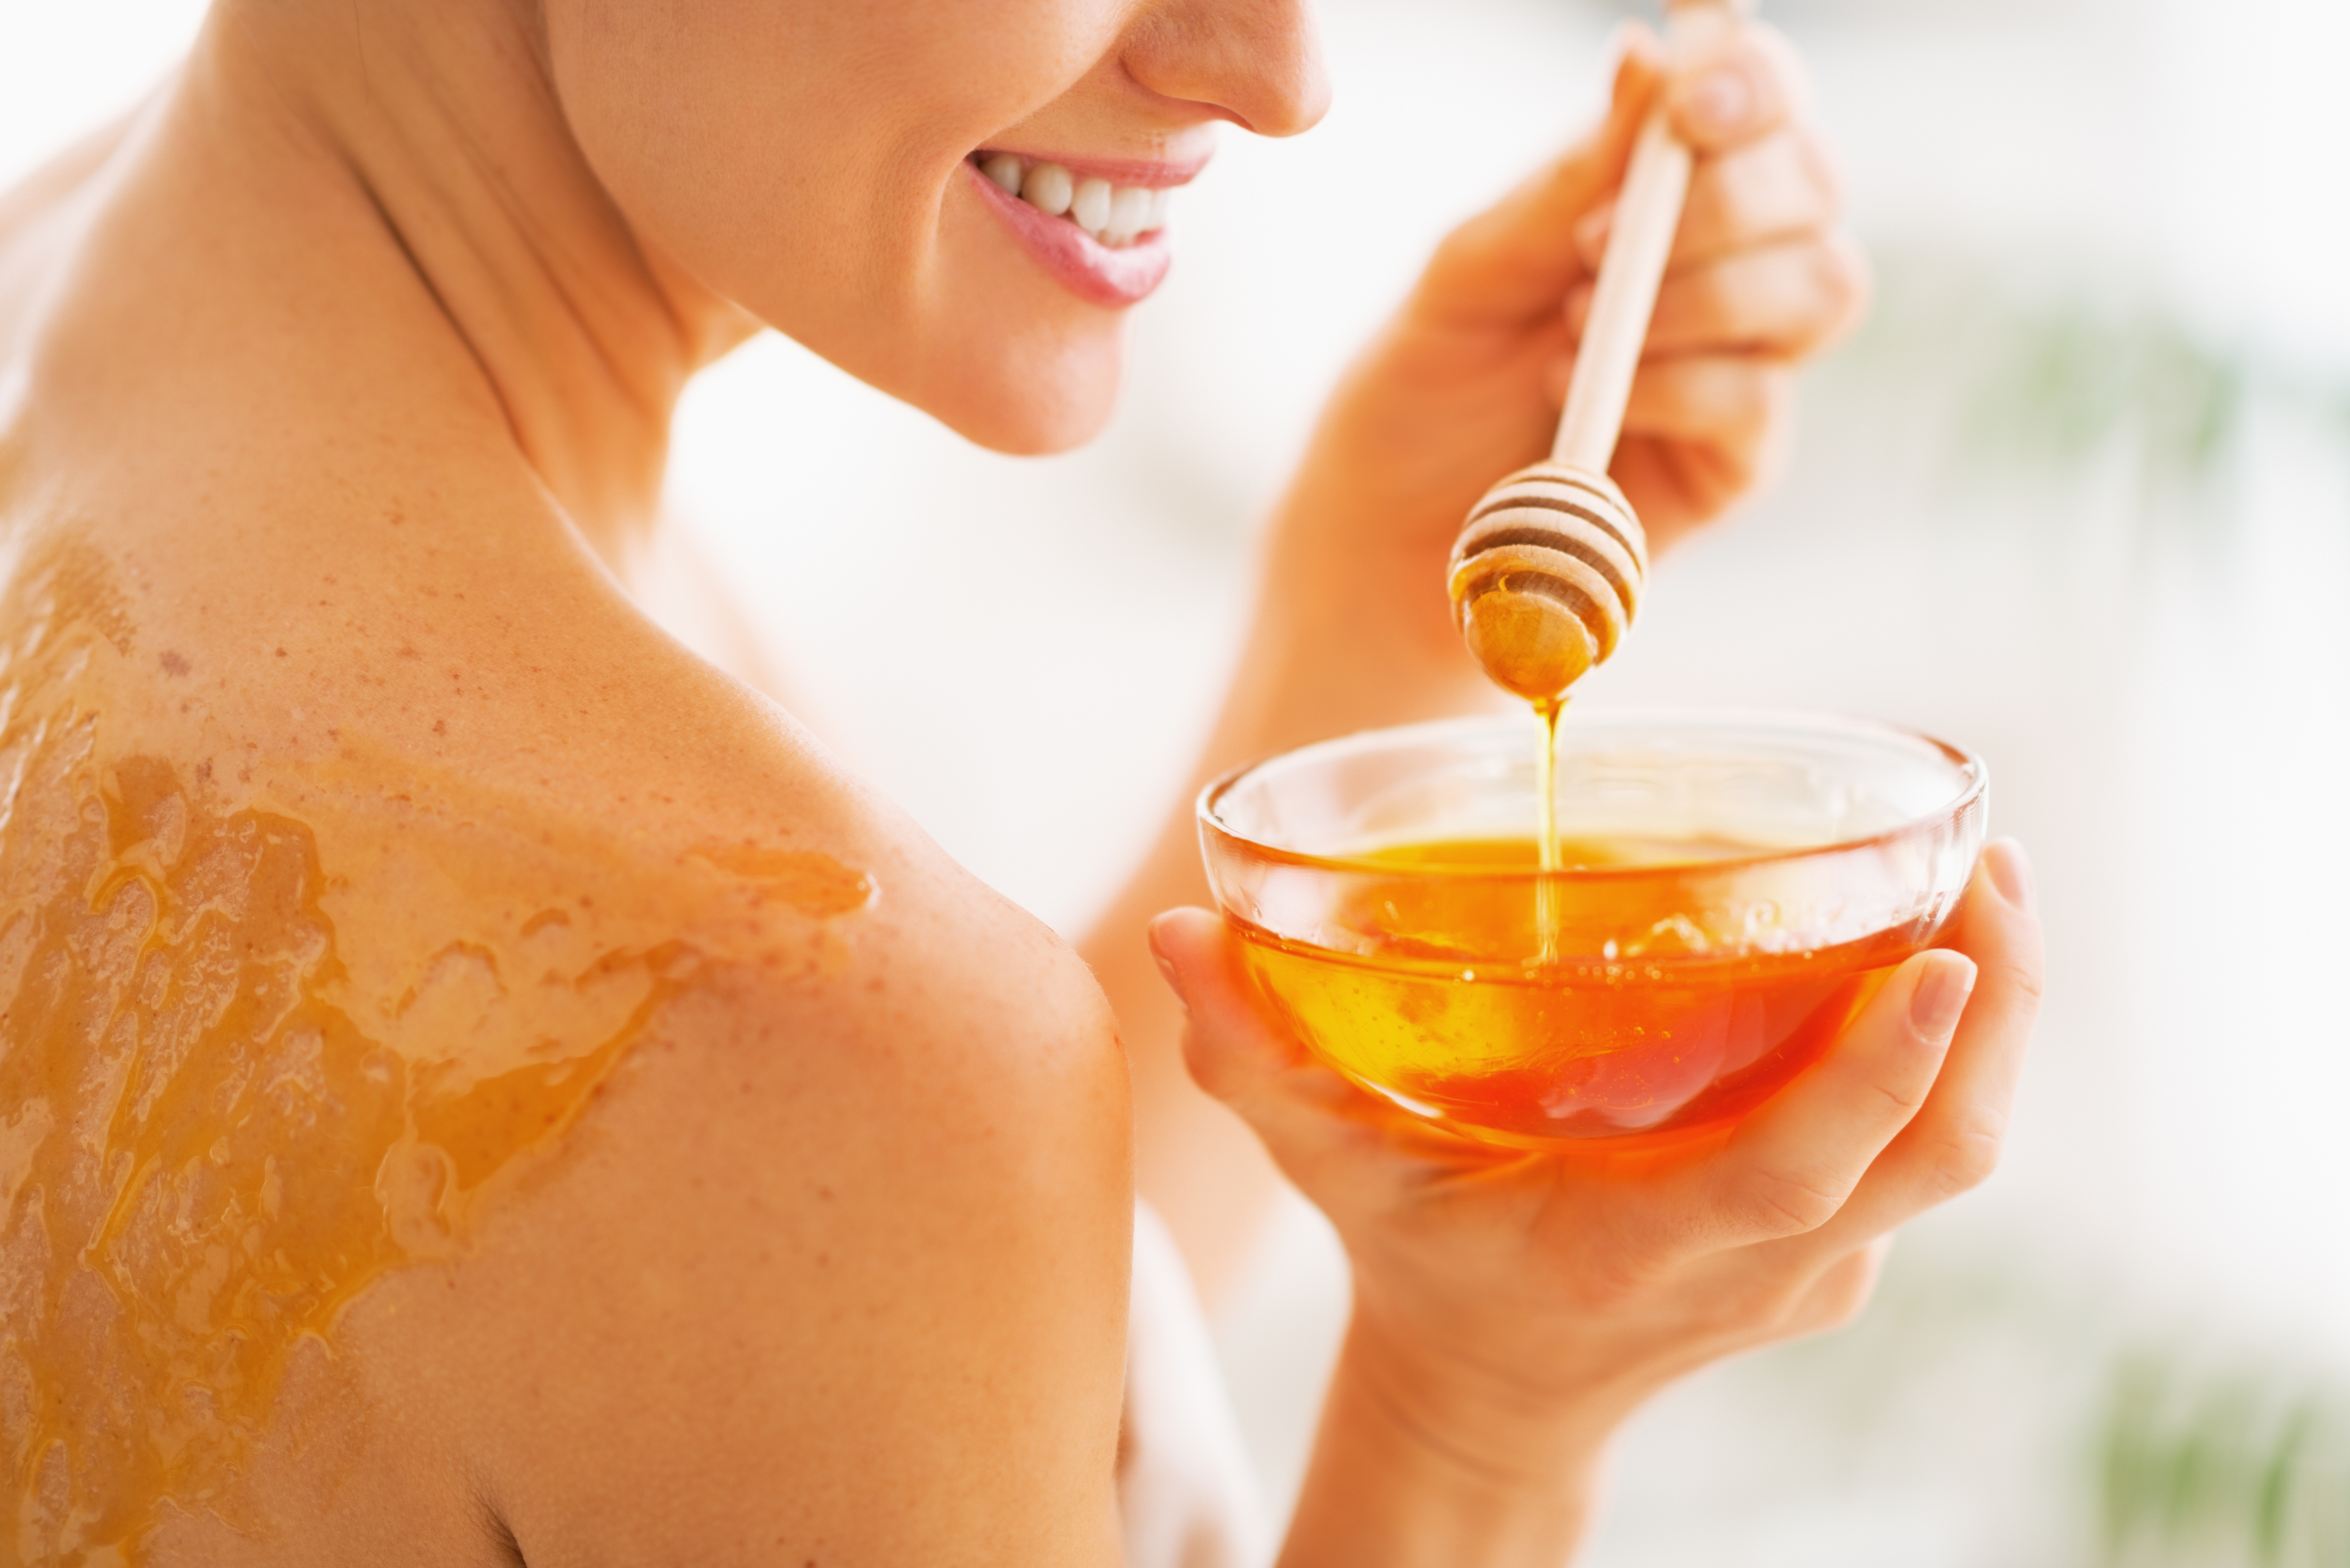 A woman putting honey on herself